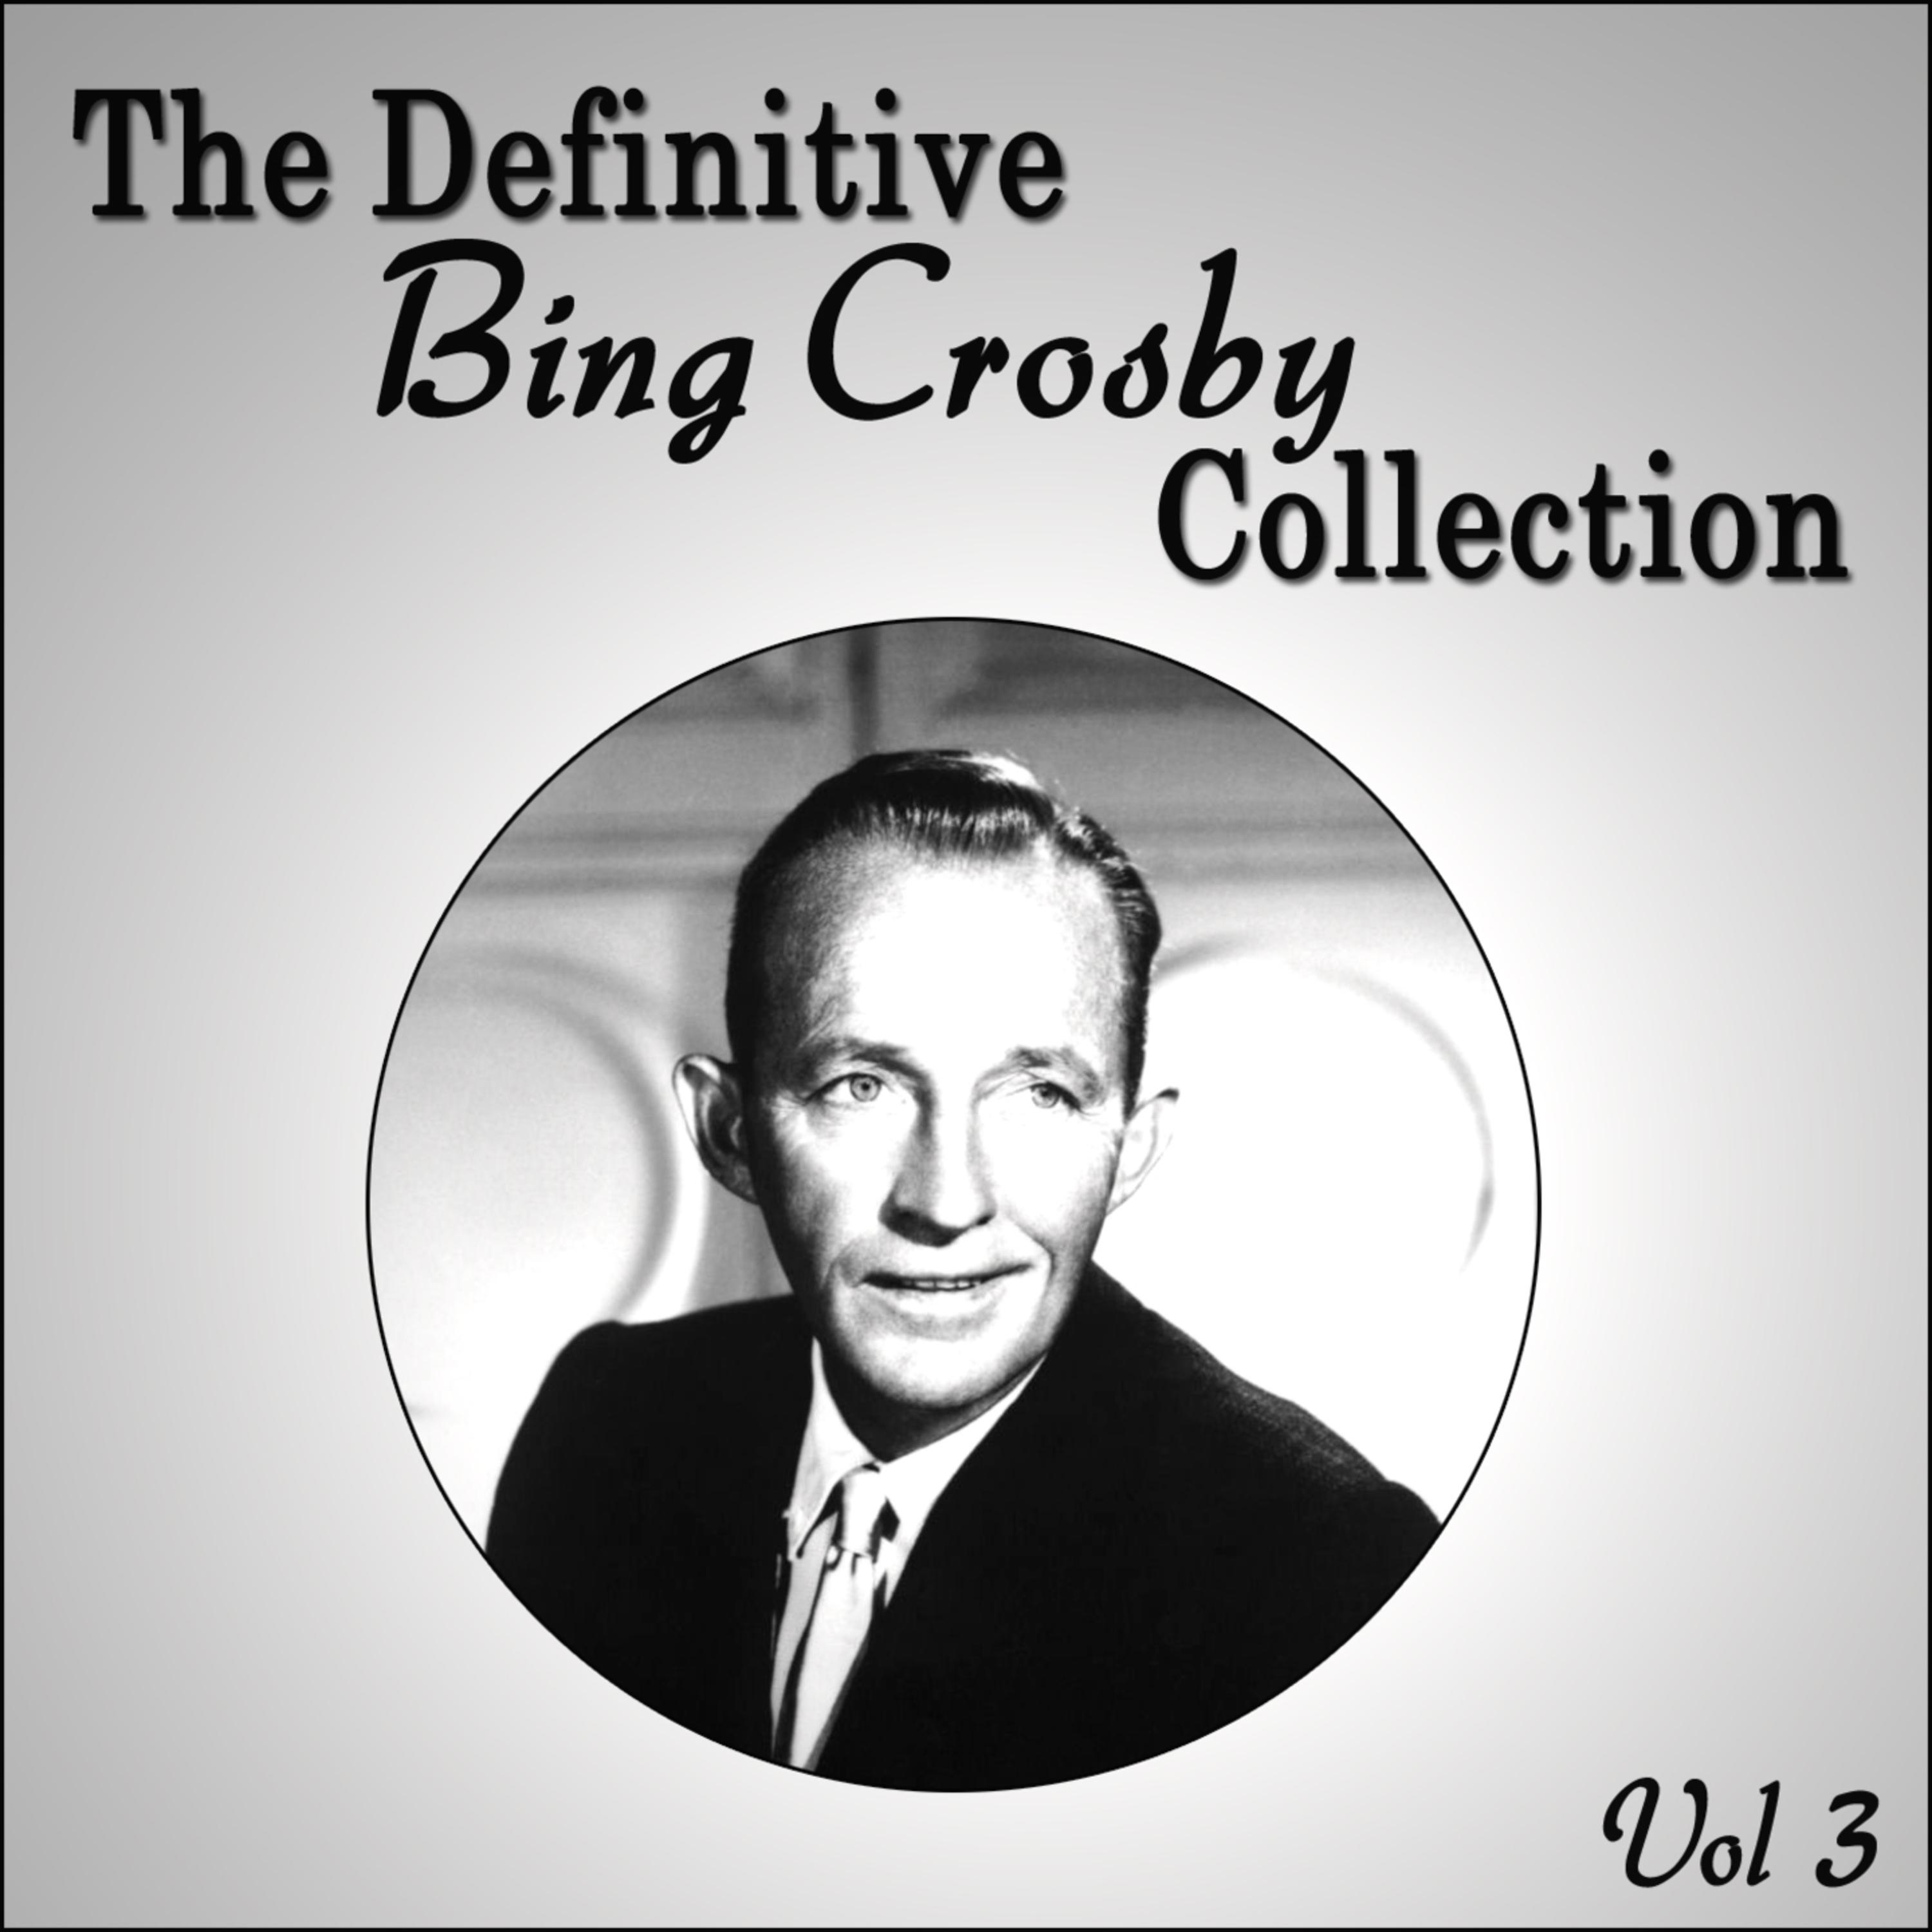 The Definitive Bing Crosby Collection - Vol 3